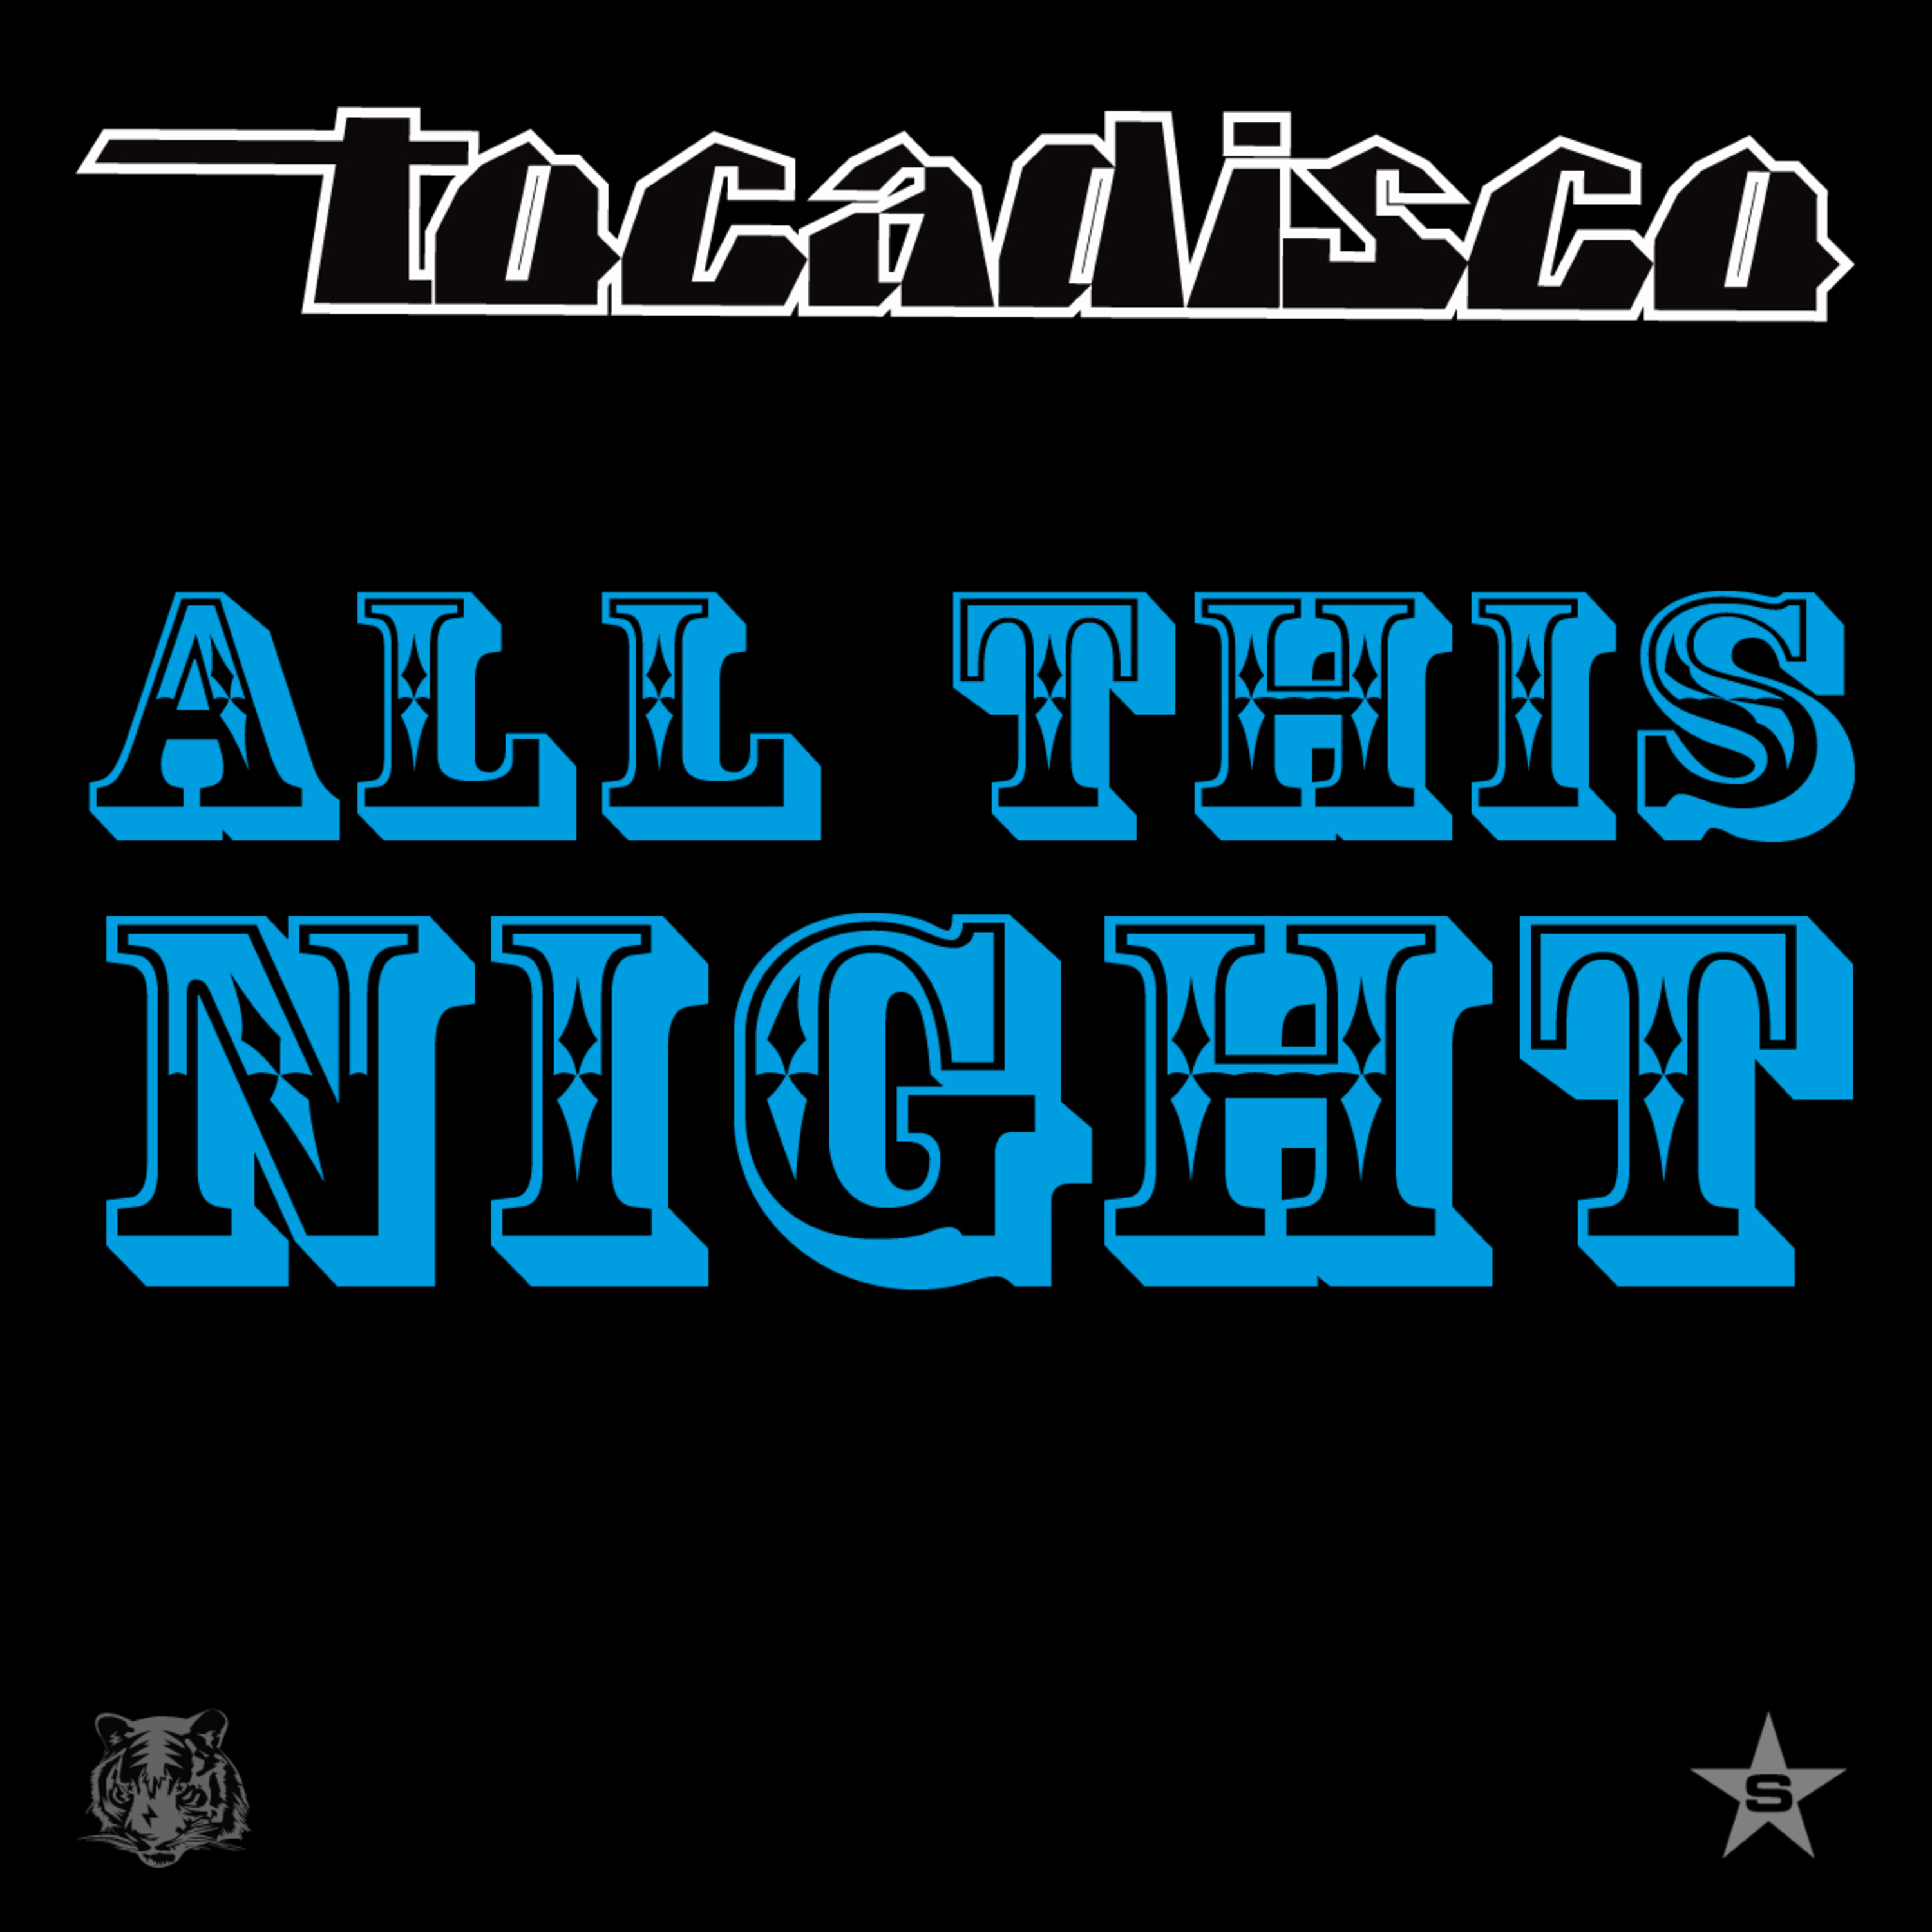 All This Night - taken from Superstar